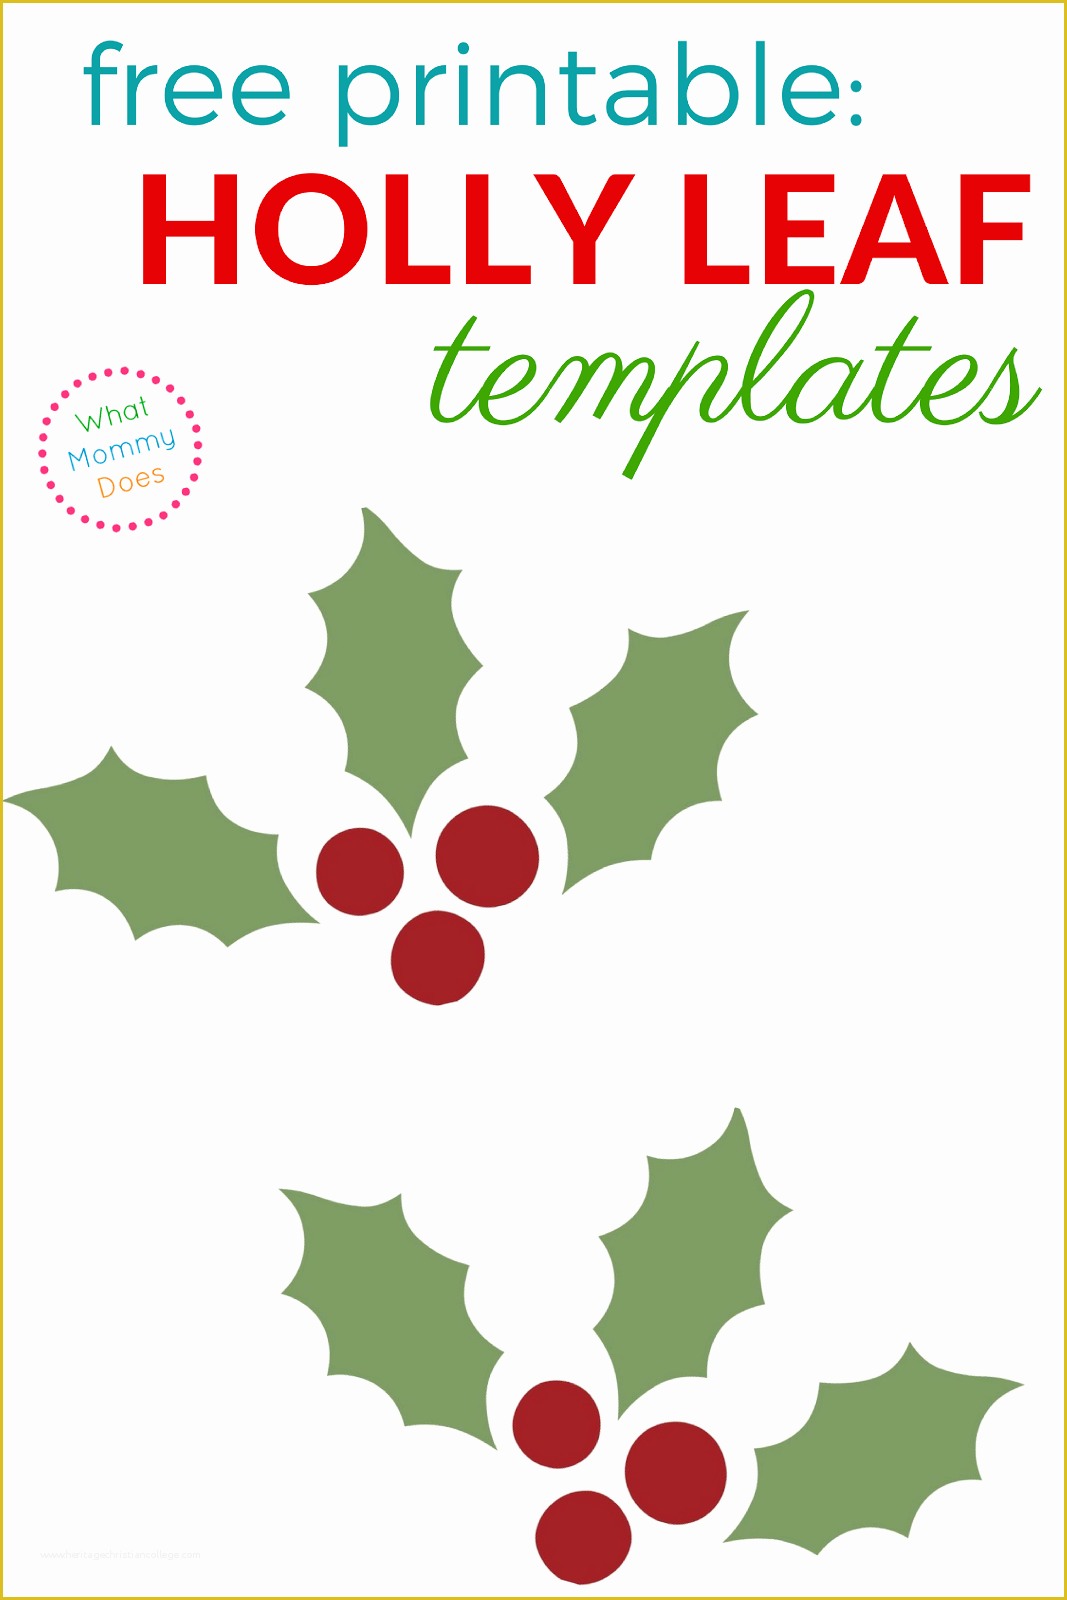 Free Printable Christmas Craft Templates Of Holly Leaf Templates Free Printable Patterns to Cut Out